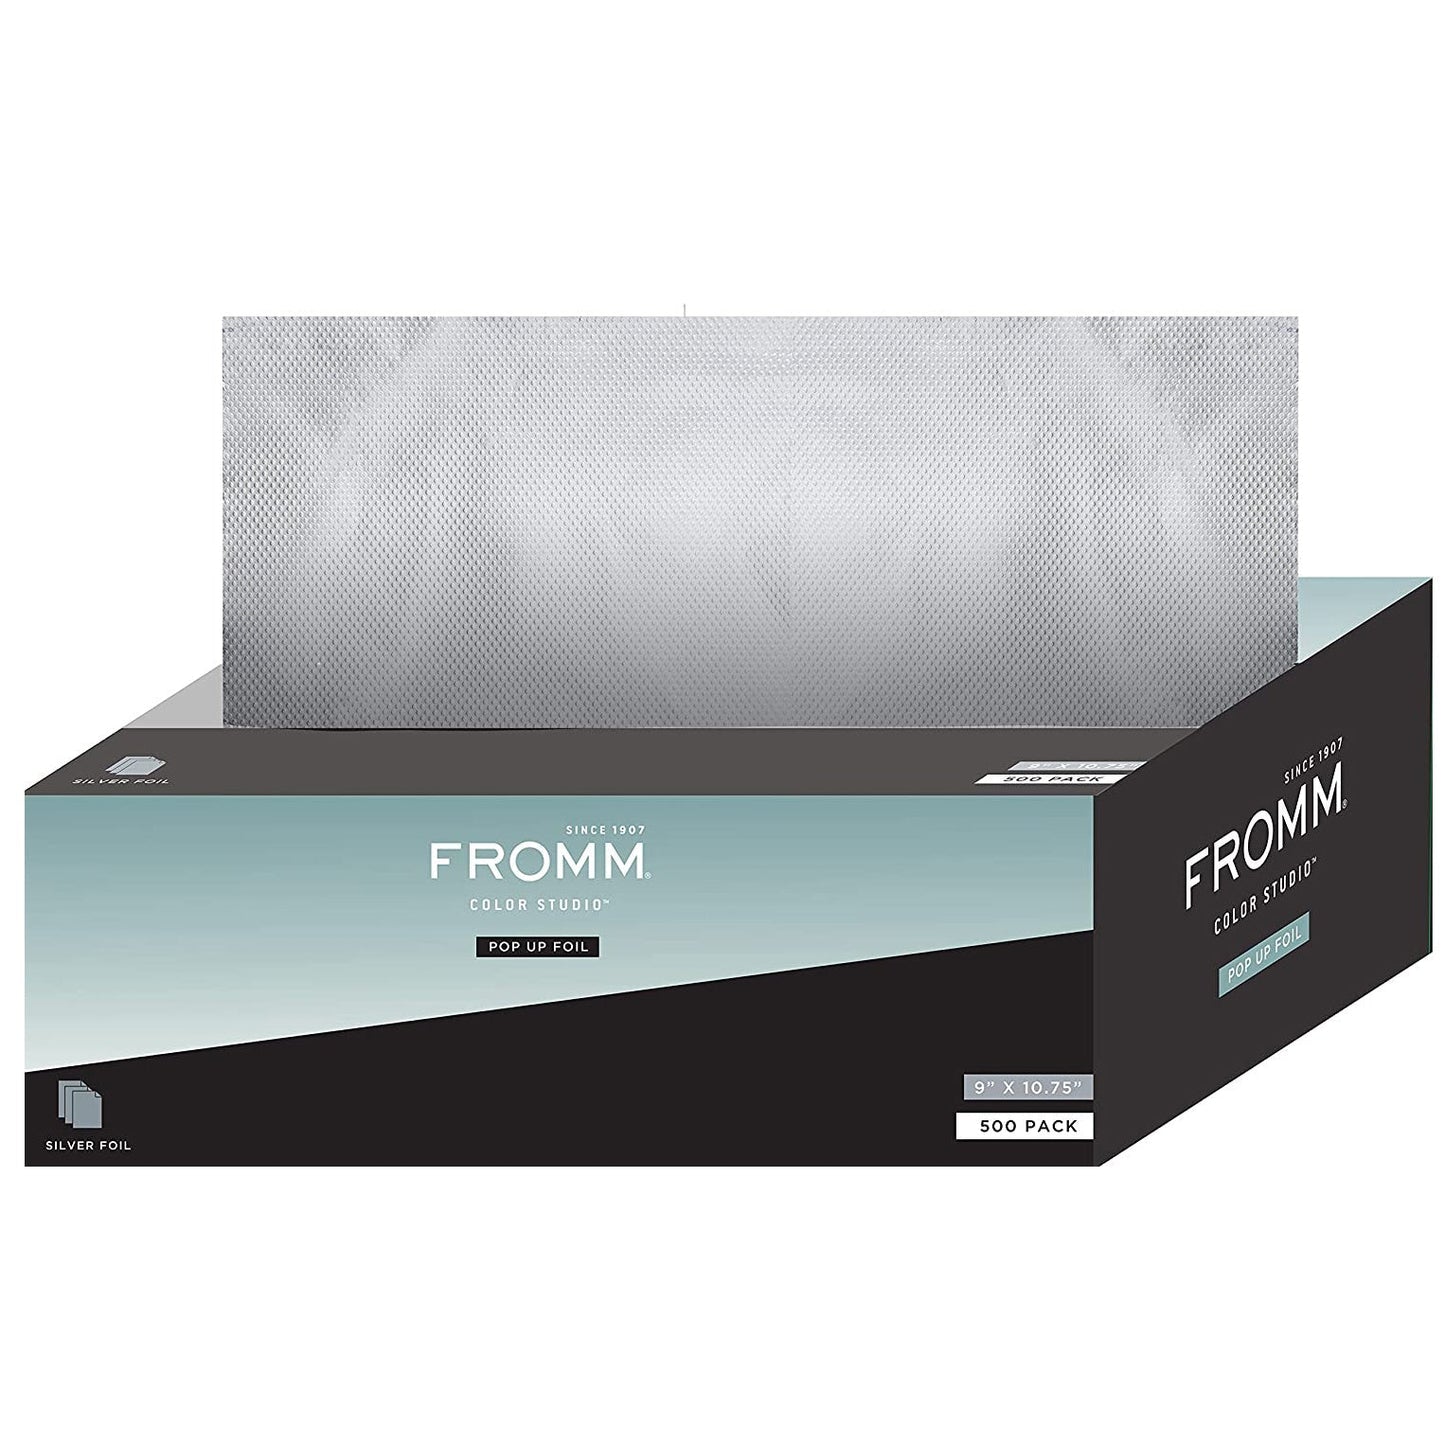 Color Studio Pop Up Foil | 9" x 10.75" | 500 Pack | FROMM HAIR COLORING ACCESSORIES FROMM 